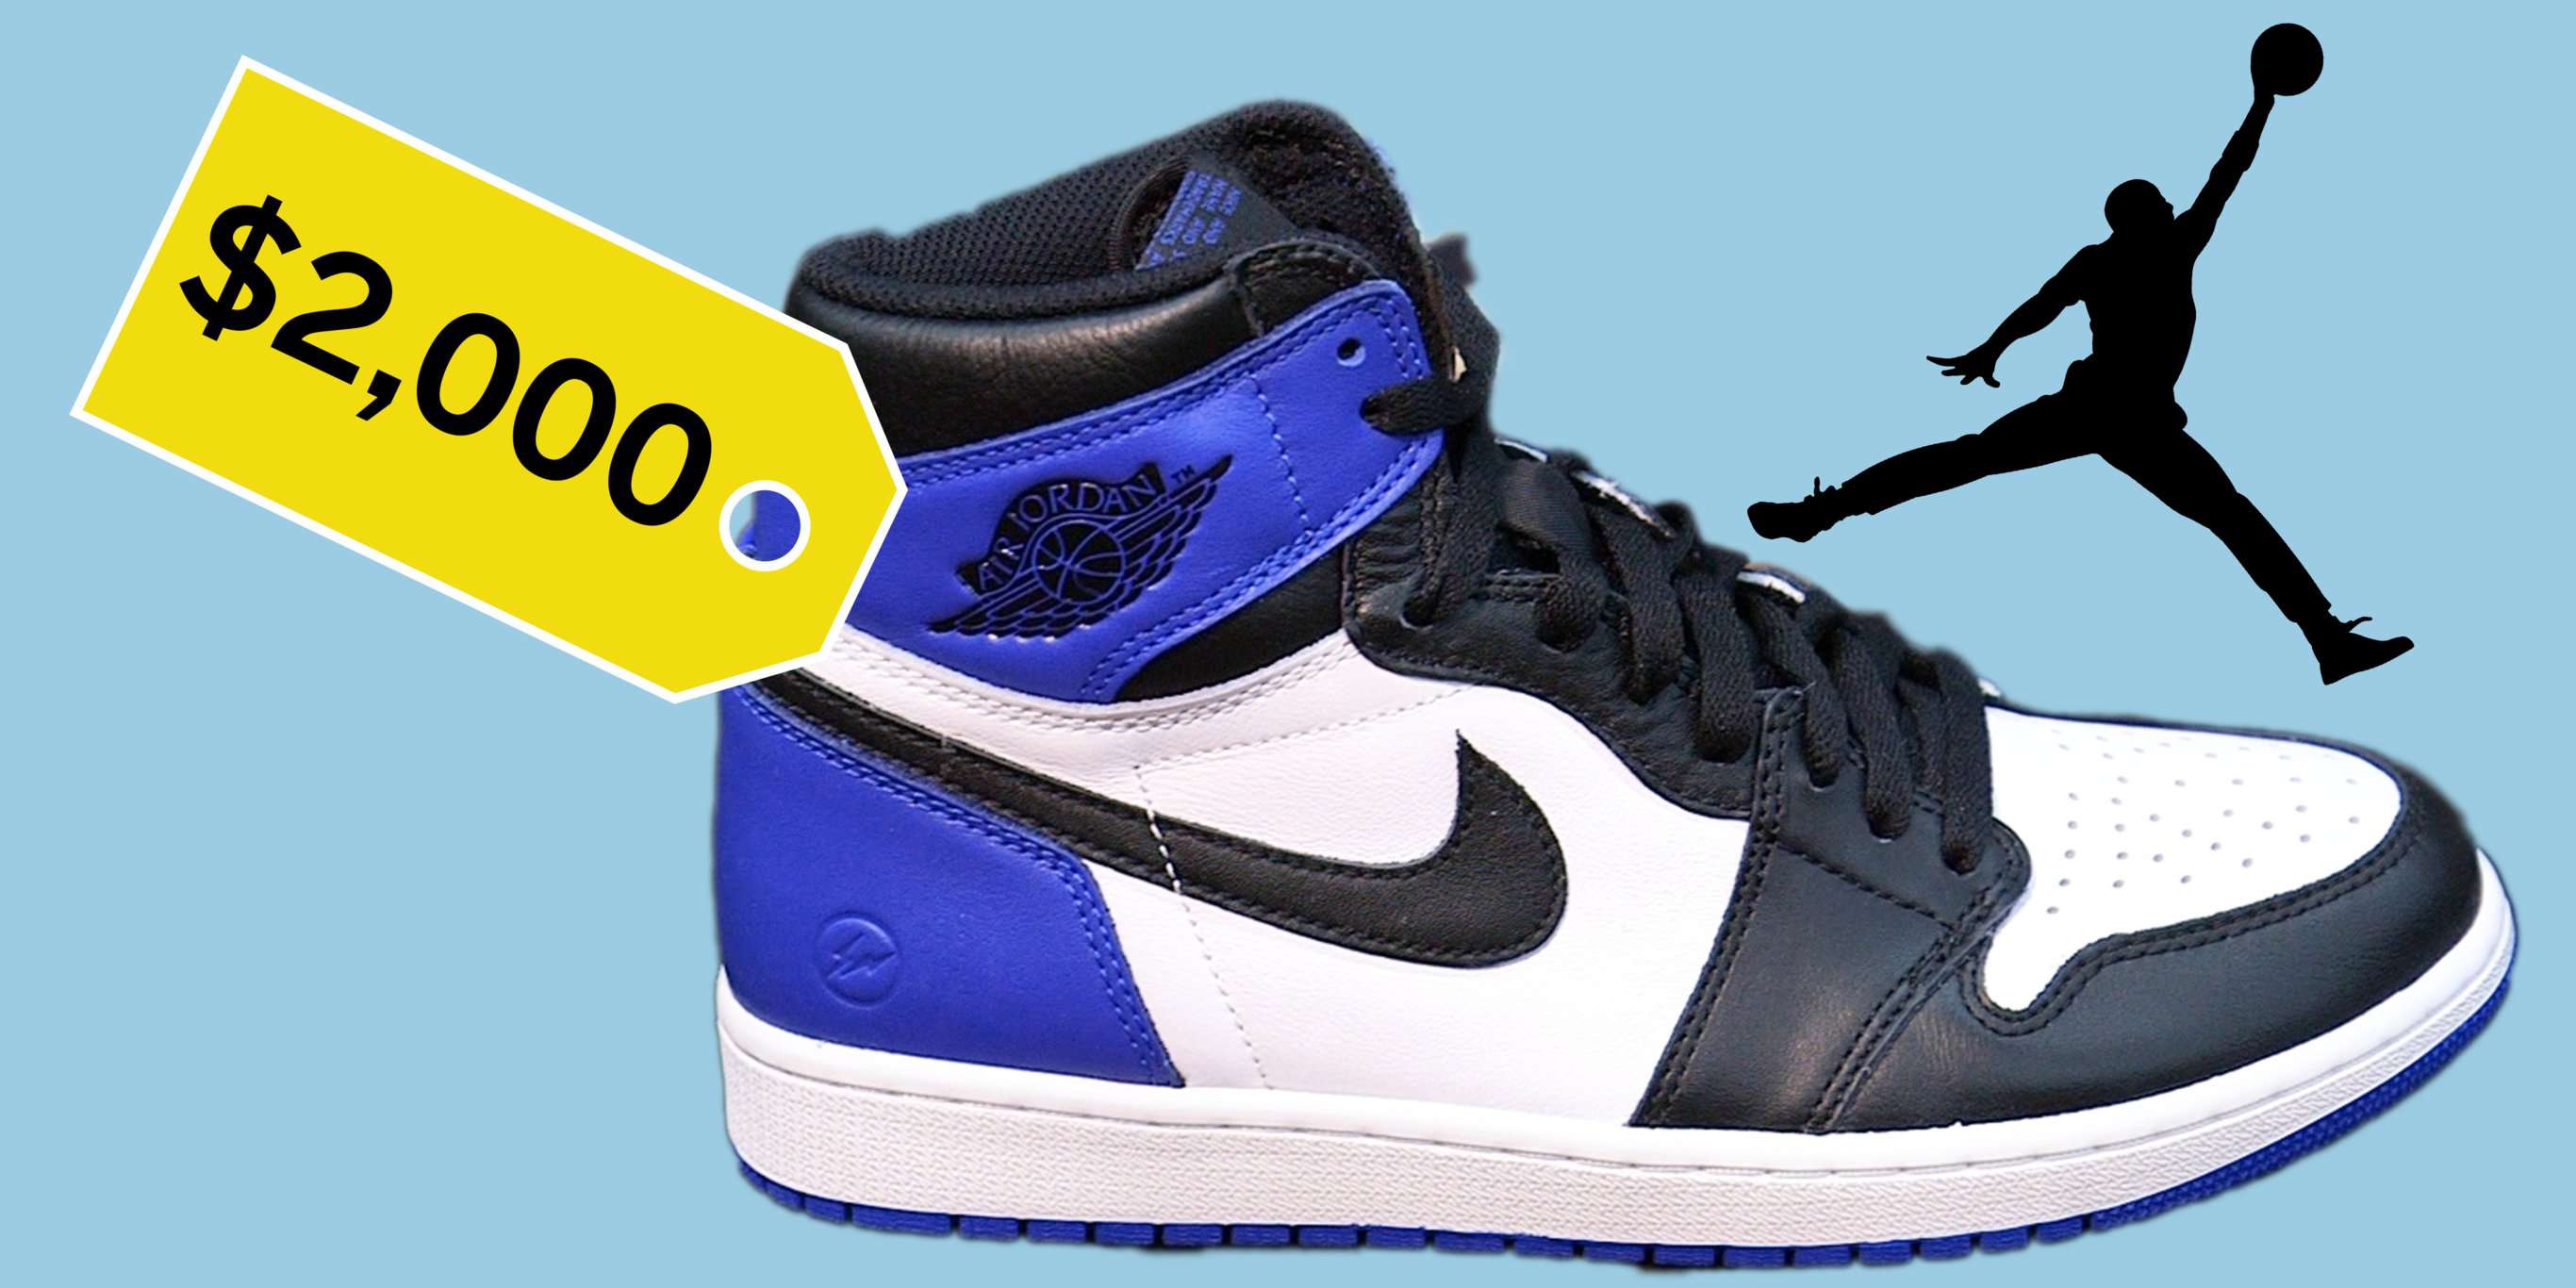 Taboola Ad Example 53769 - A Pair Of Air Jordans Can Resell For Up To $2,000. Here's Why These Iconic Nike Sneakers Are So Expensive.